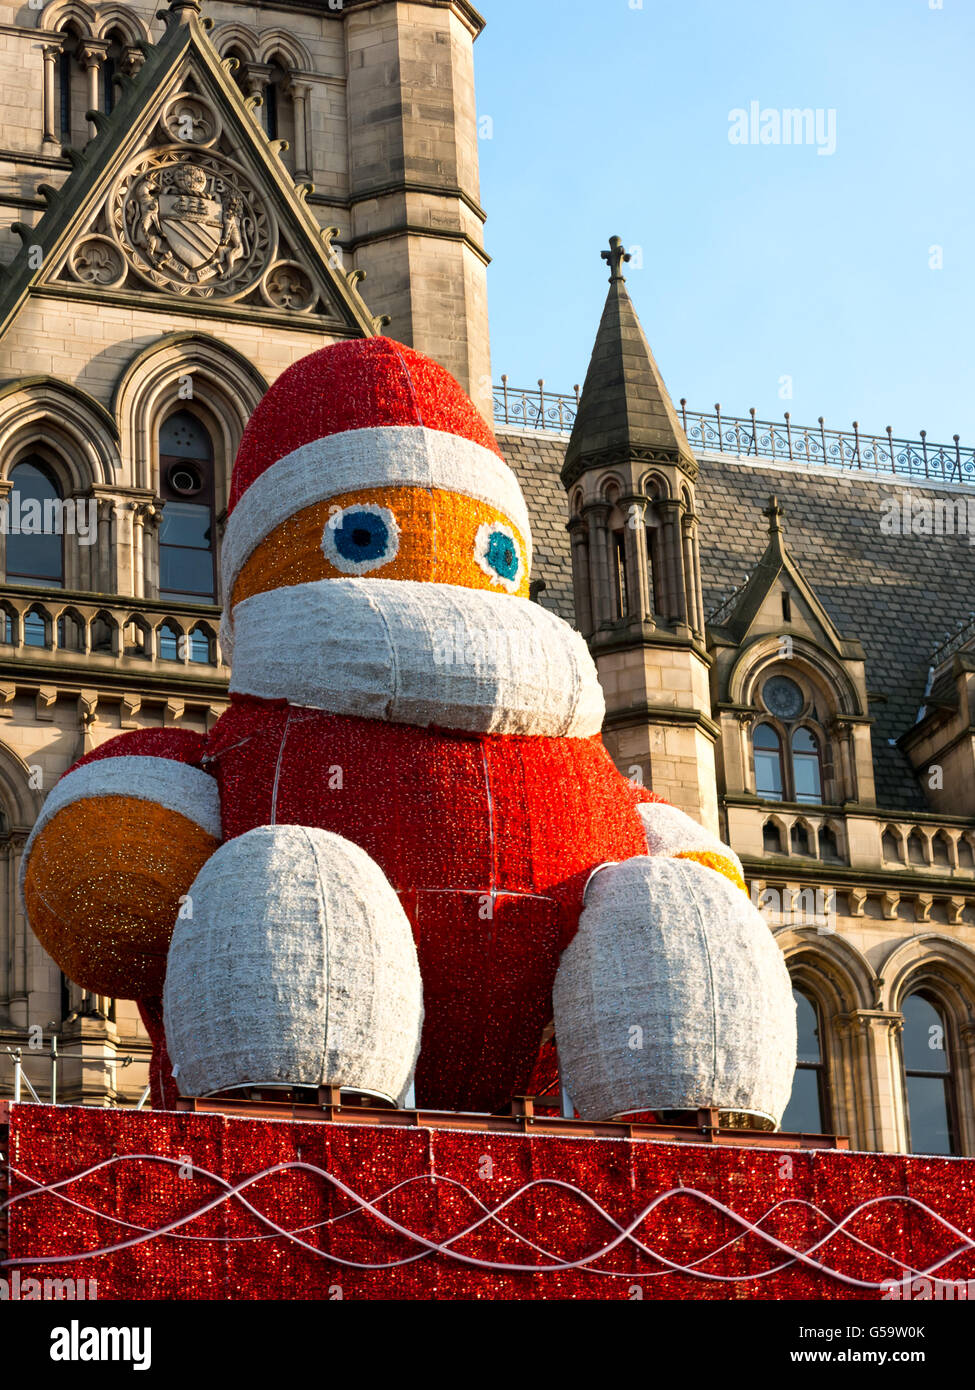 Big Santa Claus on town hall overlooking the Christmas Market on Albert Square in Manchester, England, UK Stock Photo